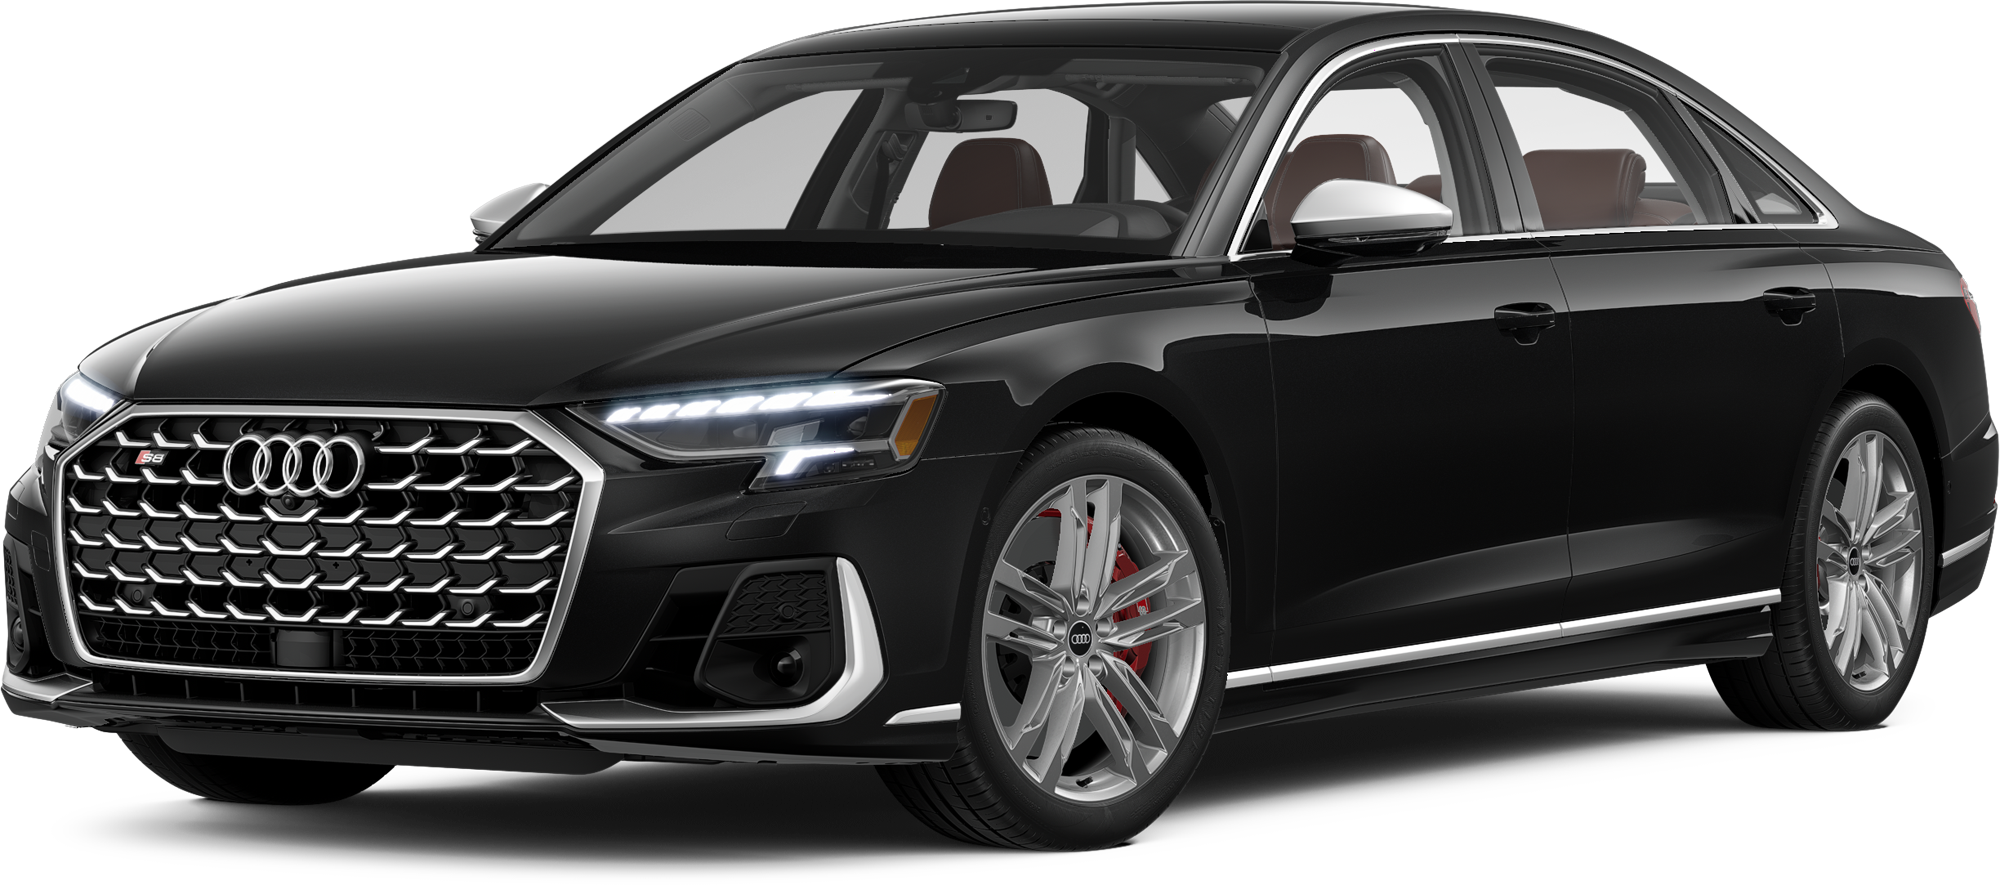 2023 Audi S8 Incentives, Specials & Offers in Grapevine TX